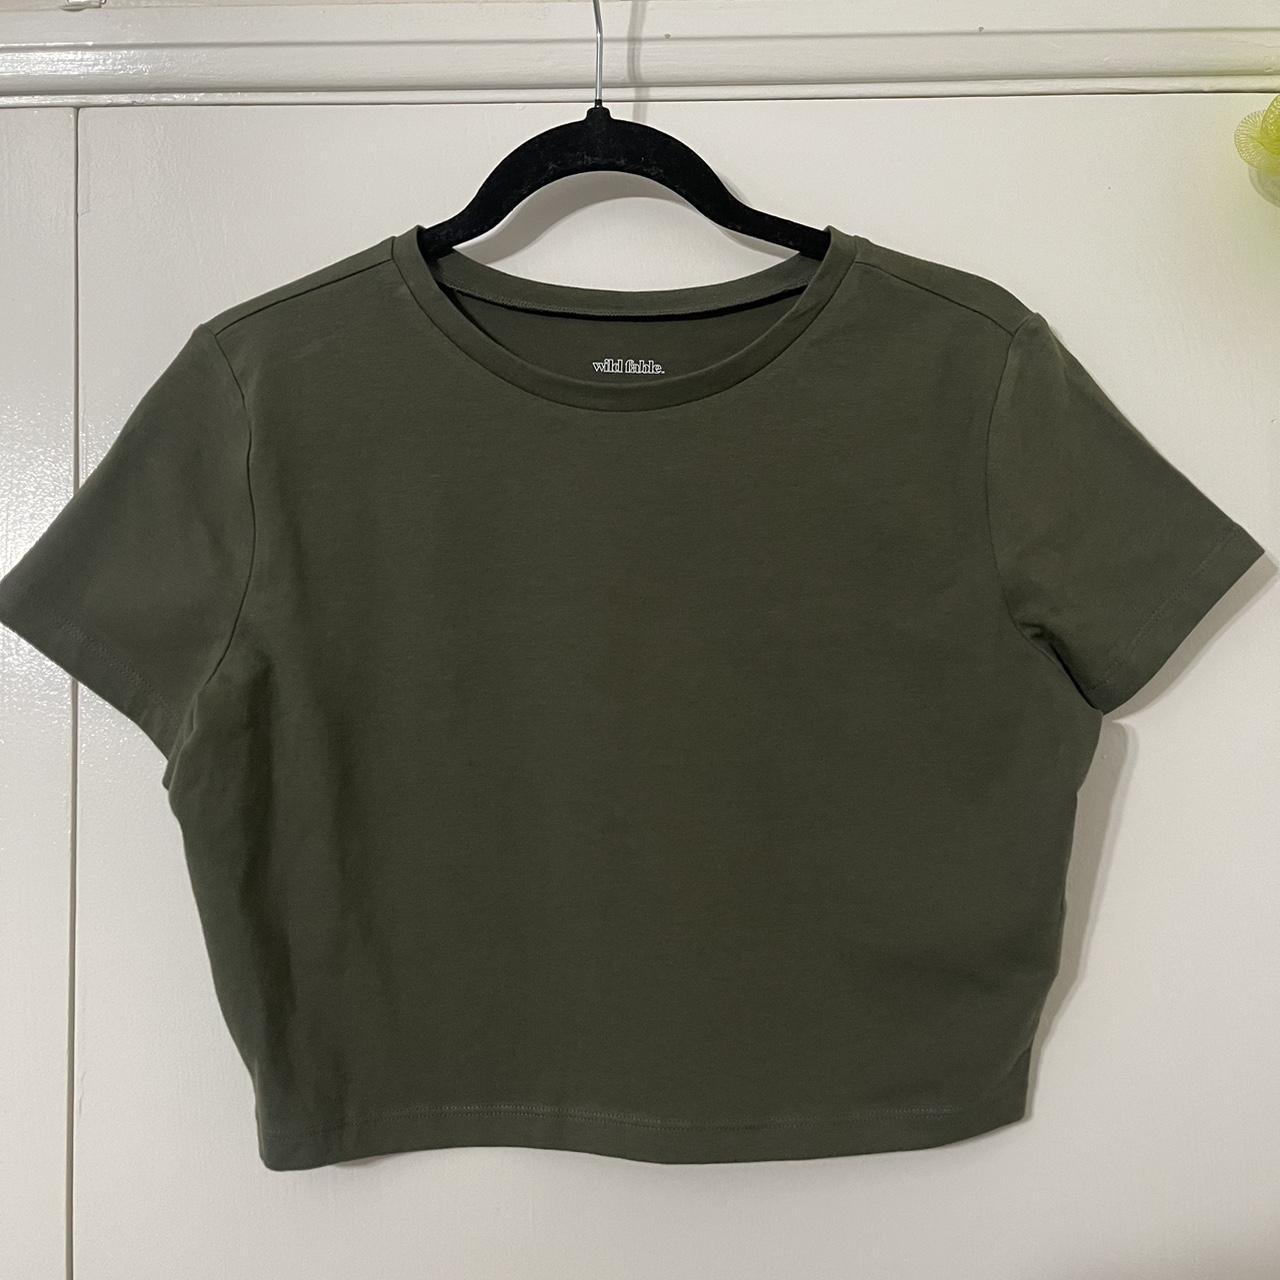 NWT Wild Fable top size medium